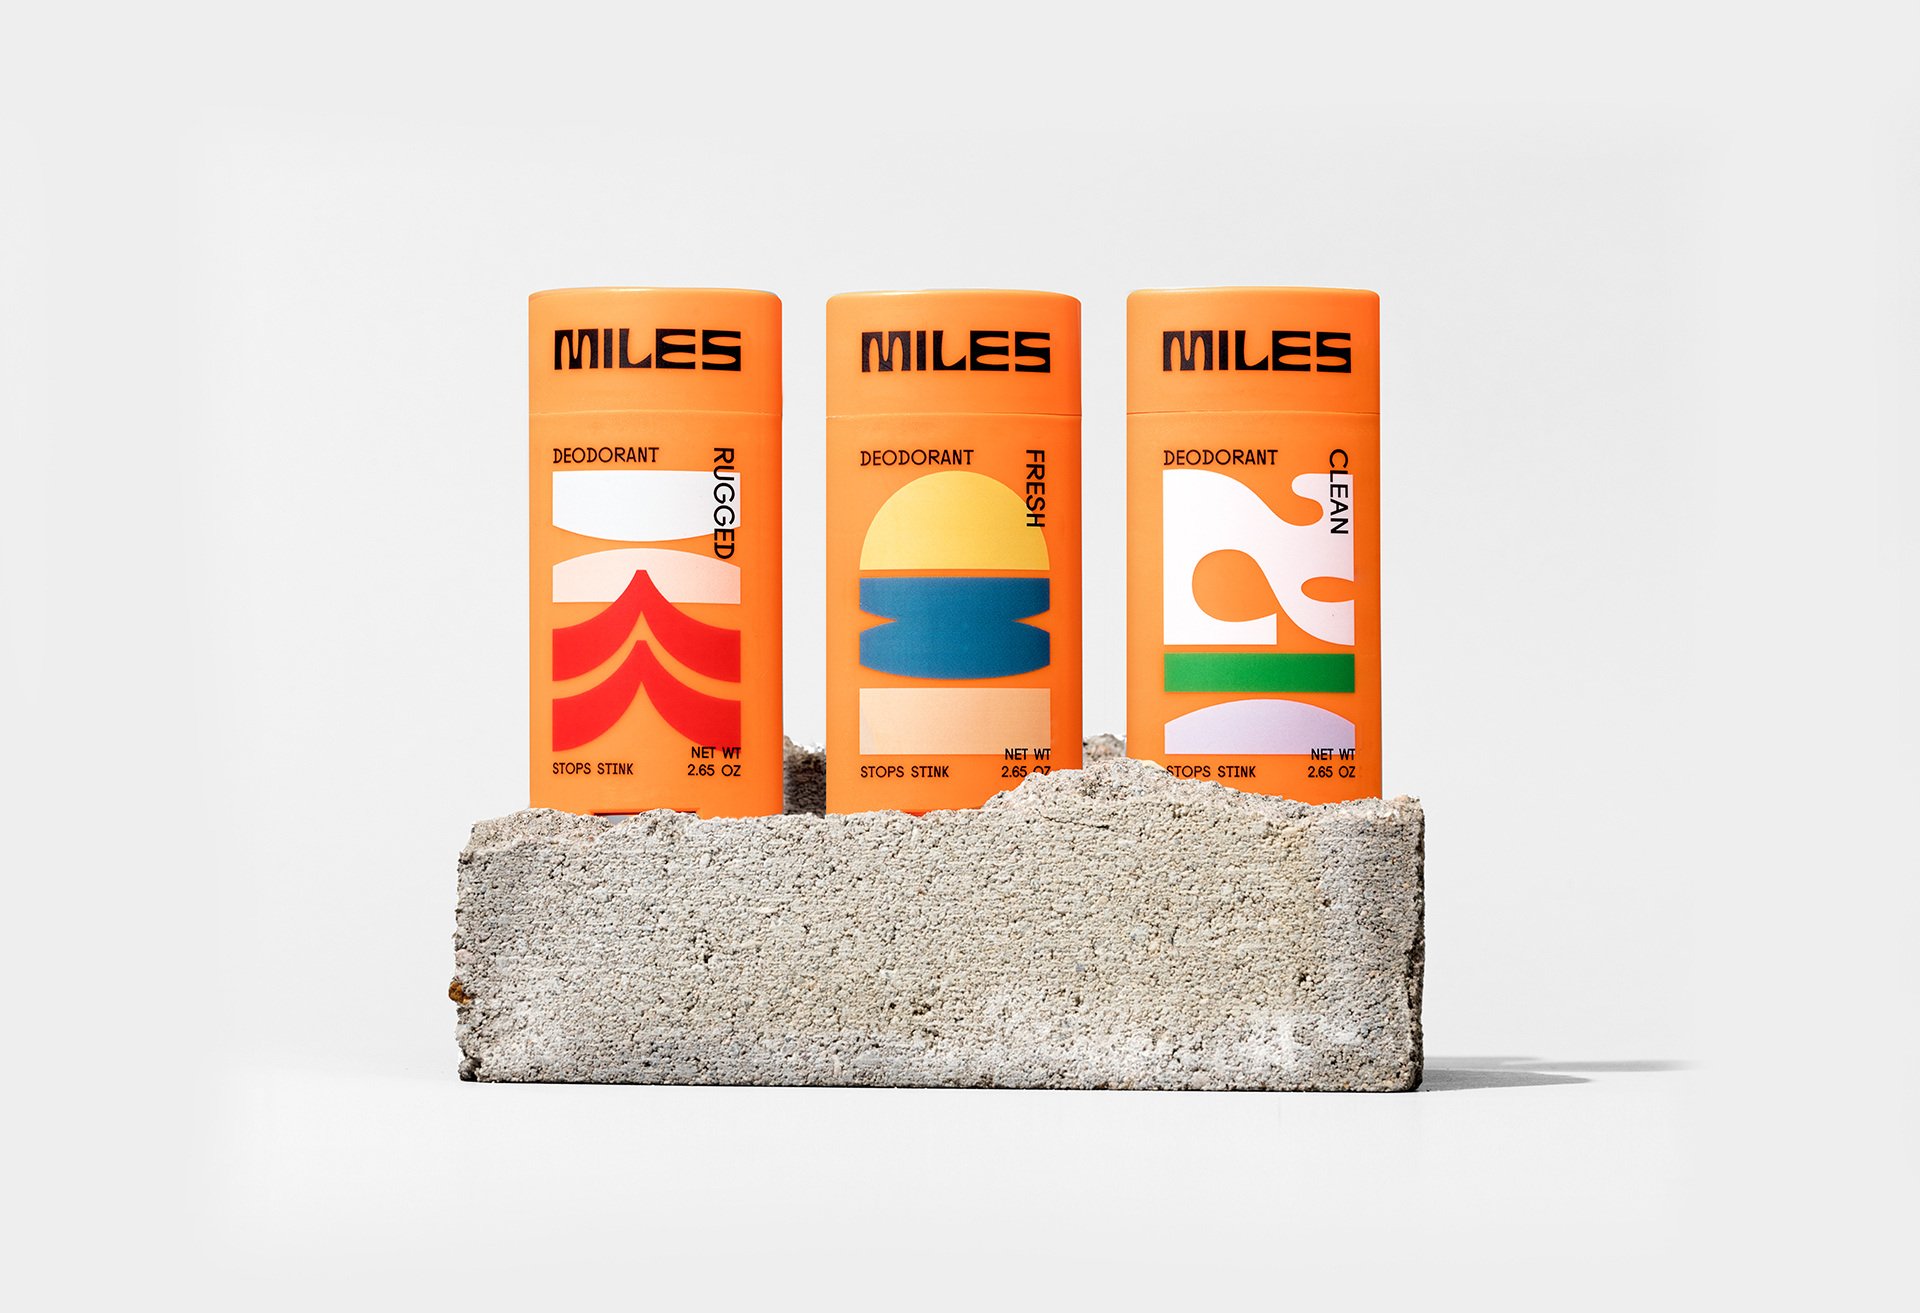 Logotype, illustration and packaging design for deodorant Miles designed by Minneapolis-based studio Buddy Buddy.